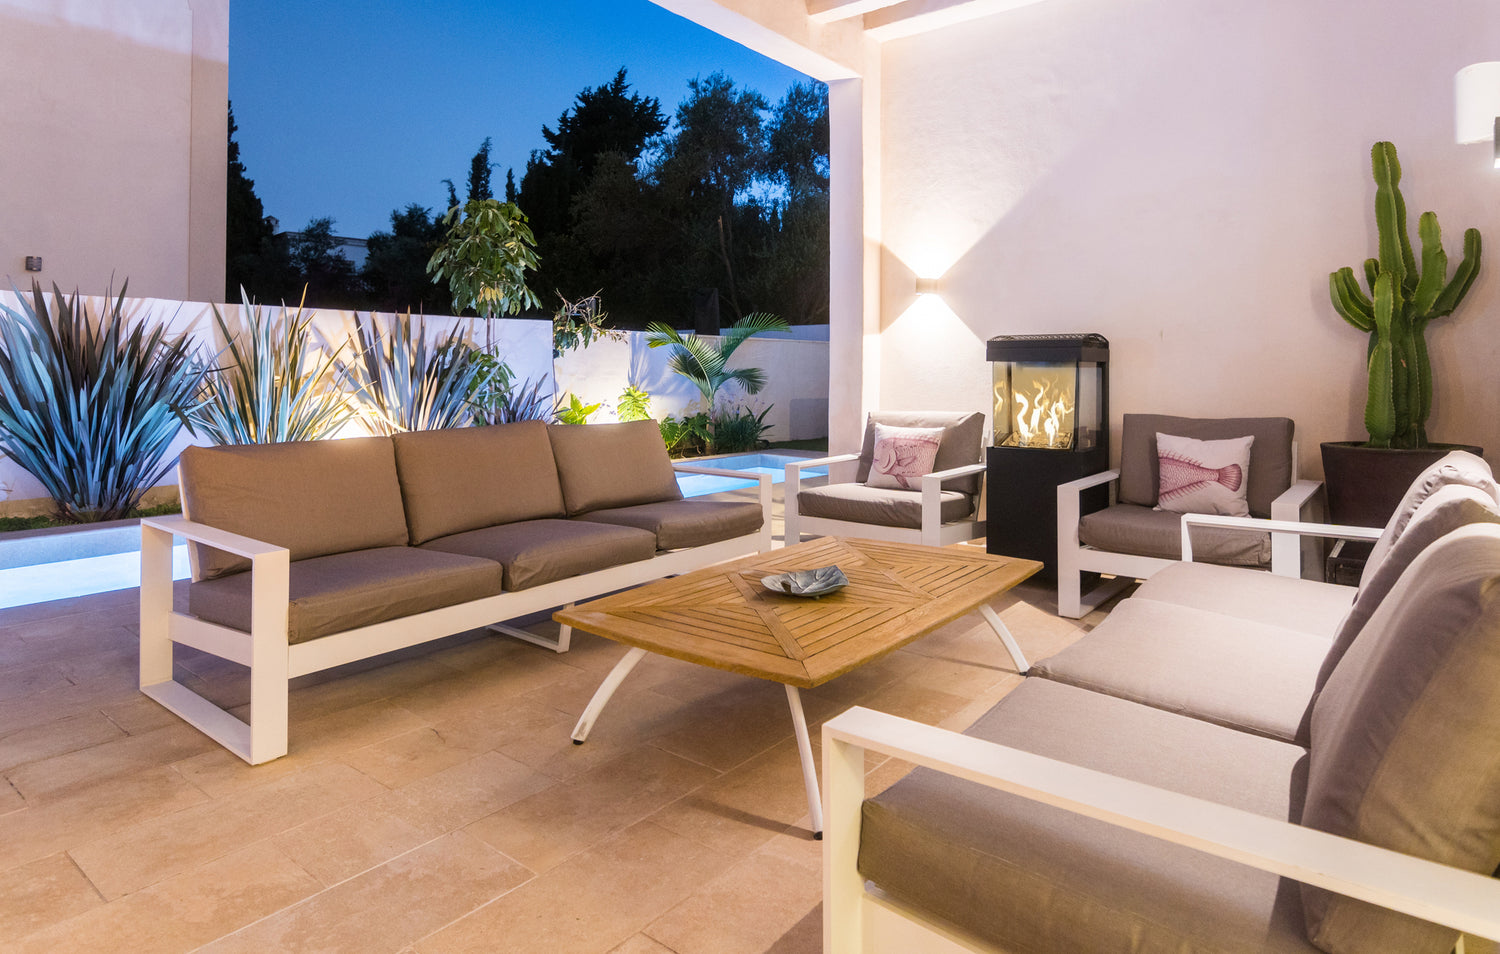 Terrace area of Villa, Marbella luxury Beach House short term rental, located on the beach side at Marbella´s exclusive Golden Mile just steps from the sea 